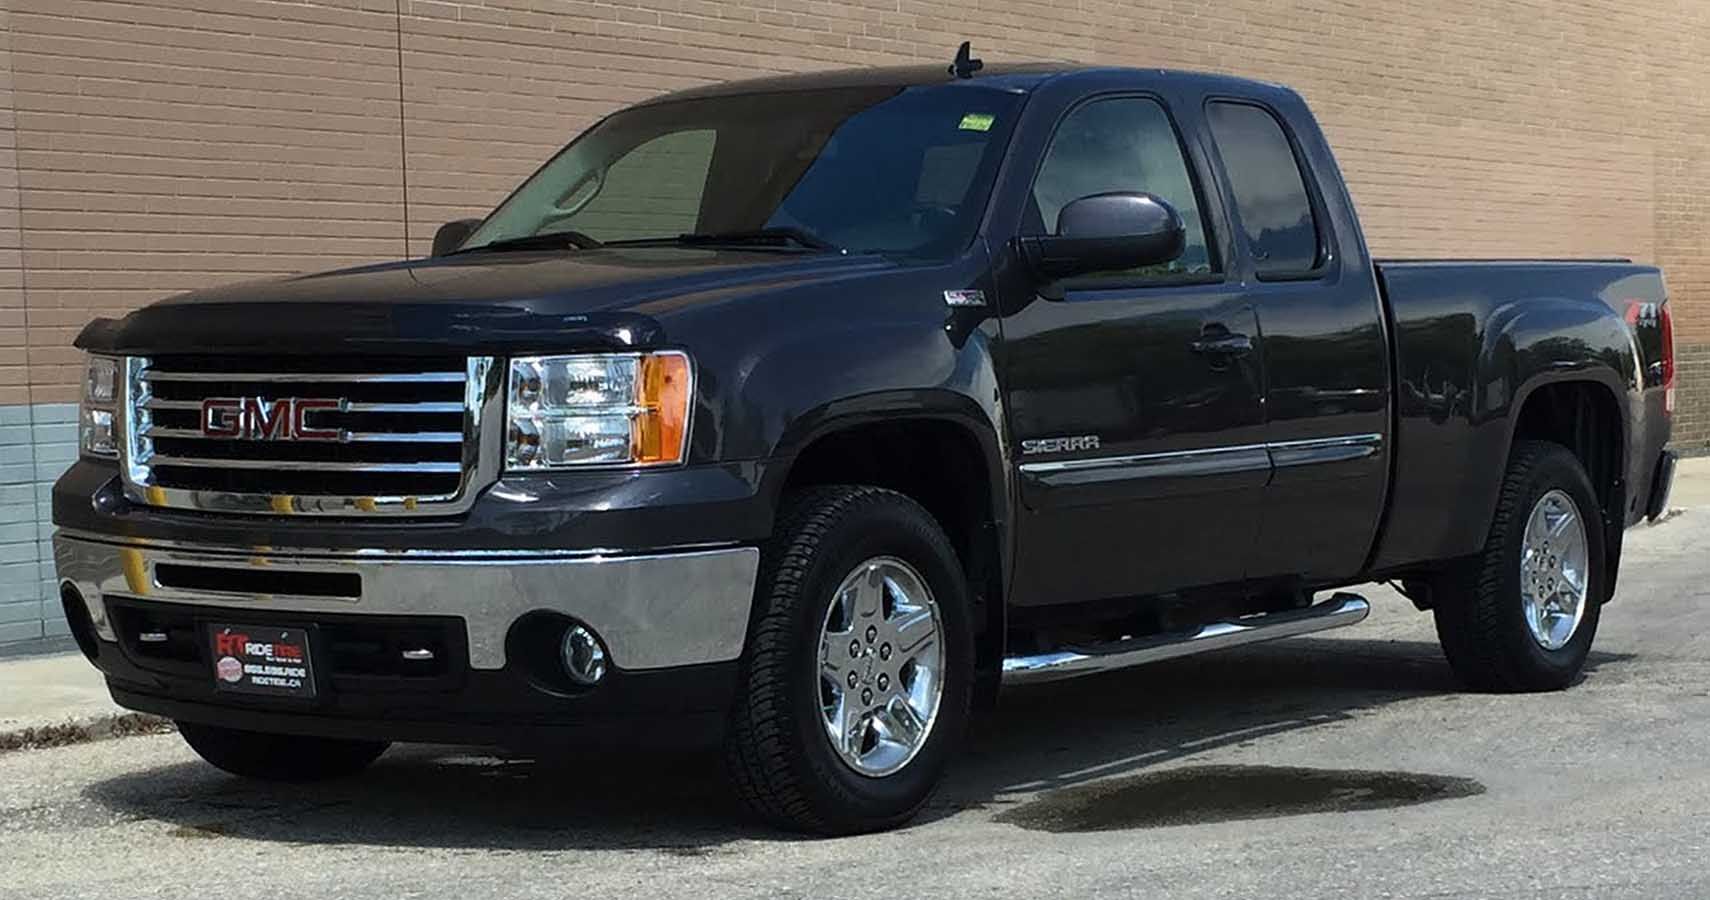 The Best Years Of GMC Sierra 1500 Are 2010,2012, & 2013